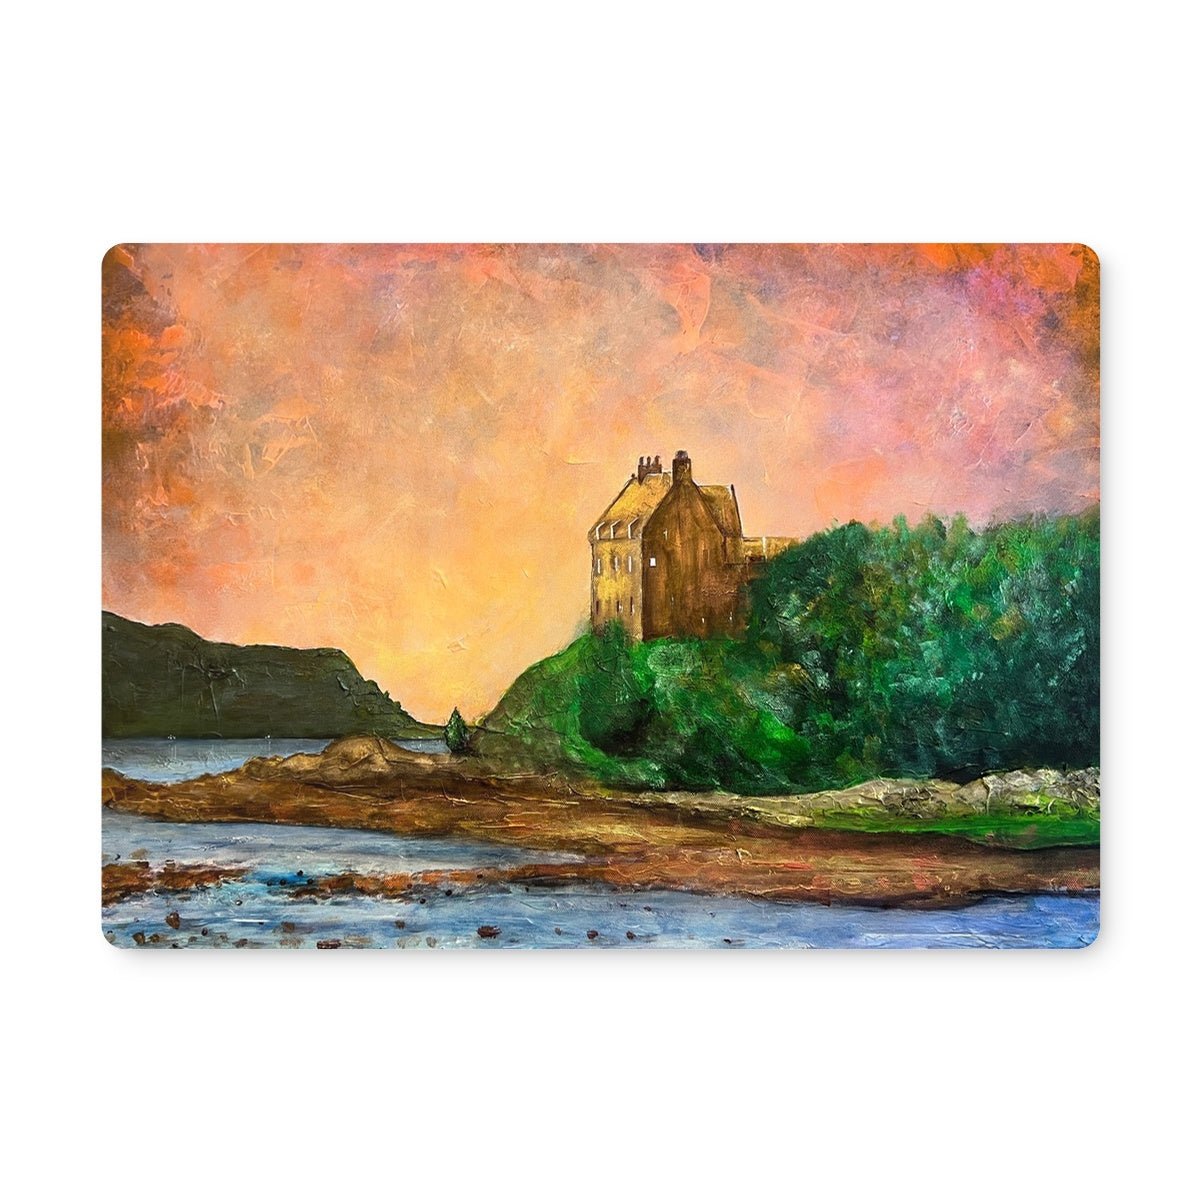 Duntrune Castle Art Gifts Placemat-Placemats-Scottish Castles Art Gallery-Single Placemat-Paintings, Prints, Homeware, Art Gifts From Scotland By Scottish Artist Kevin Hunter